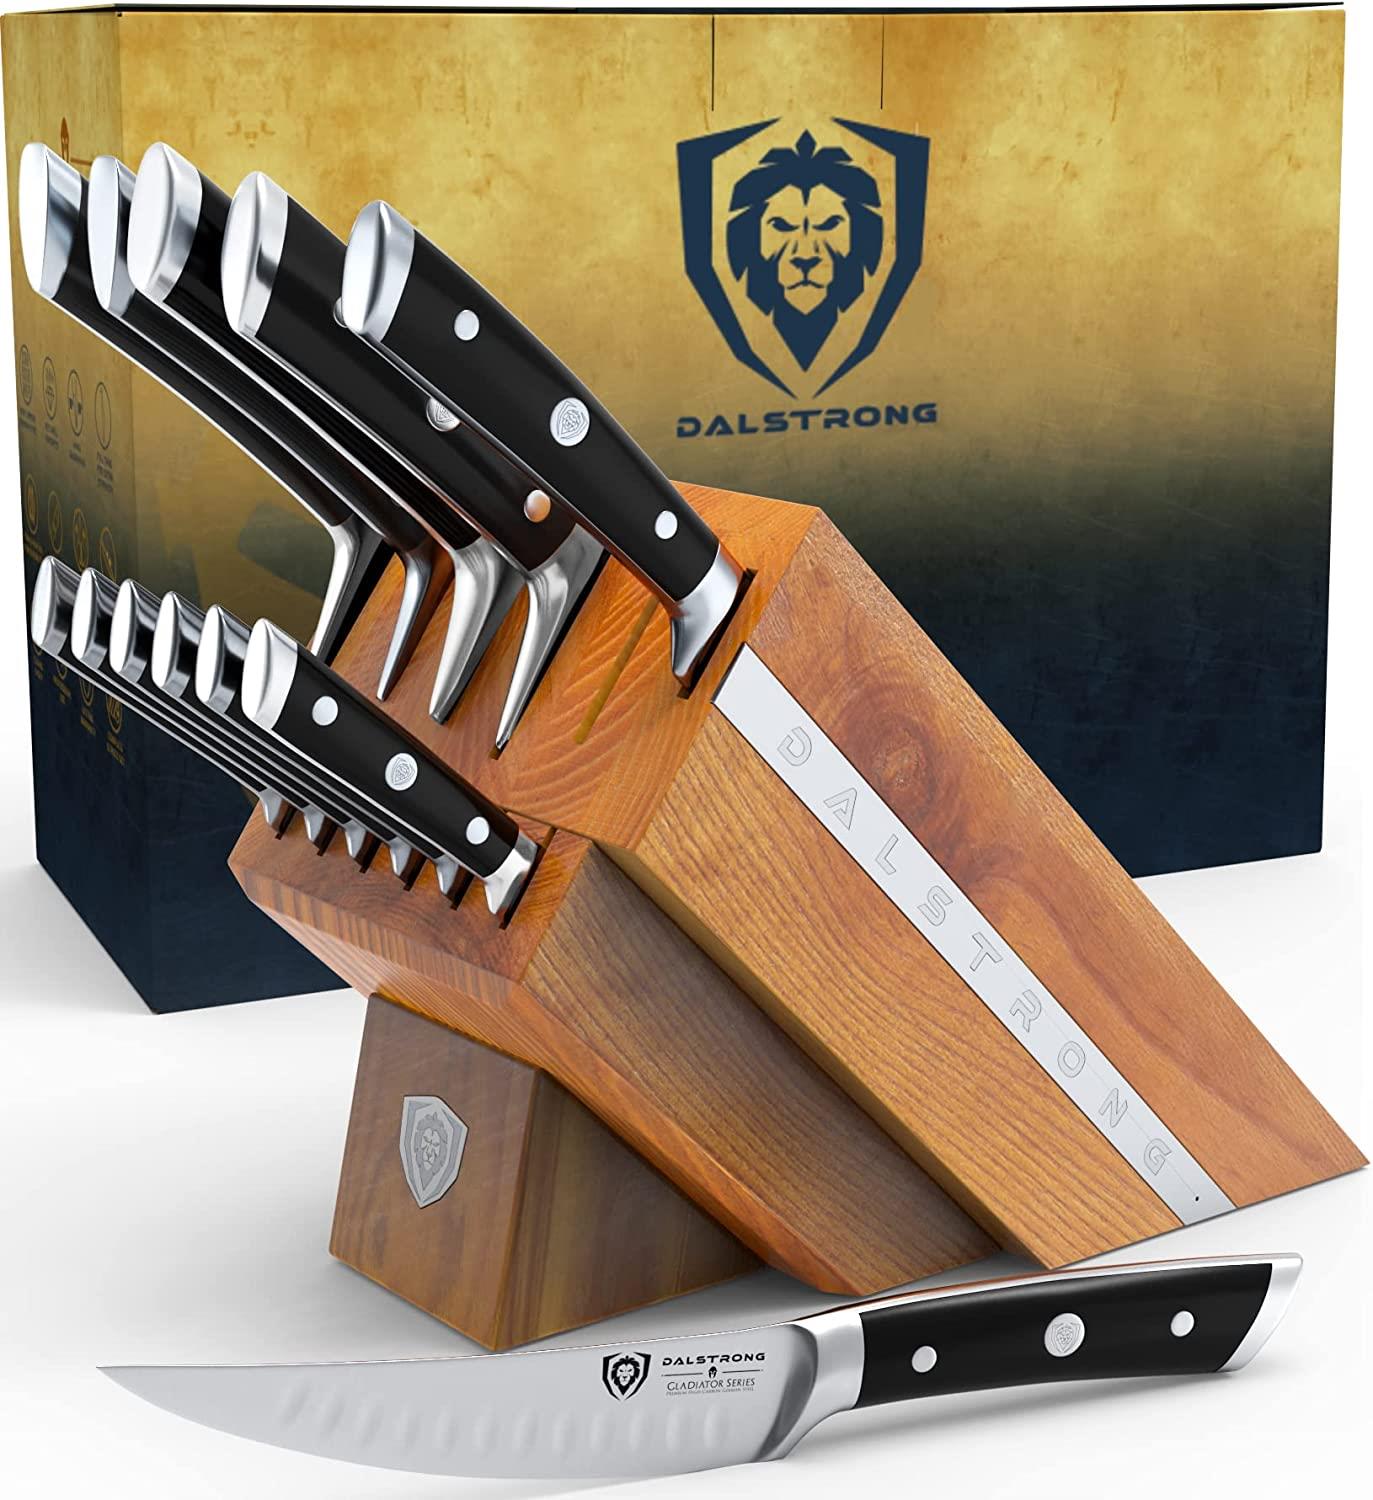 Dalstrong 12-Piece Complete Knife Set with Storage Block - German